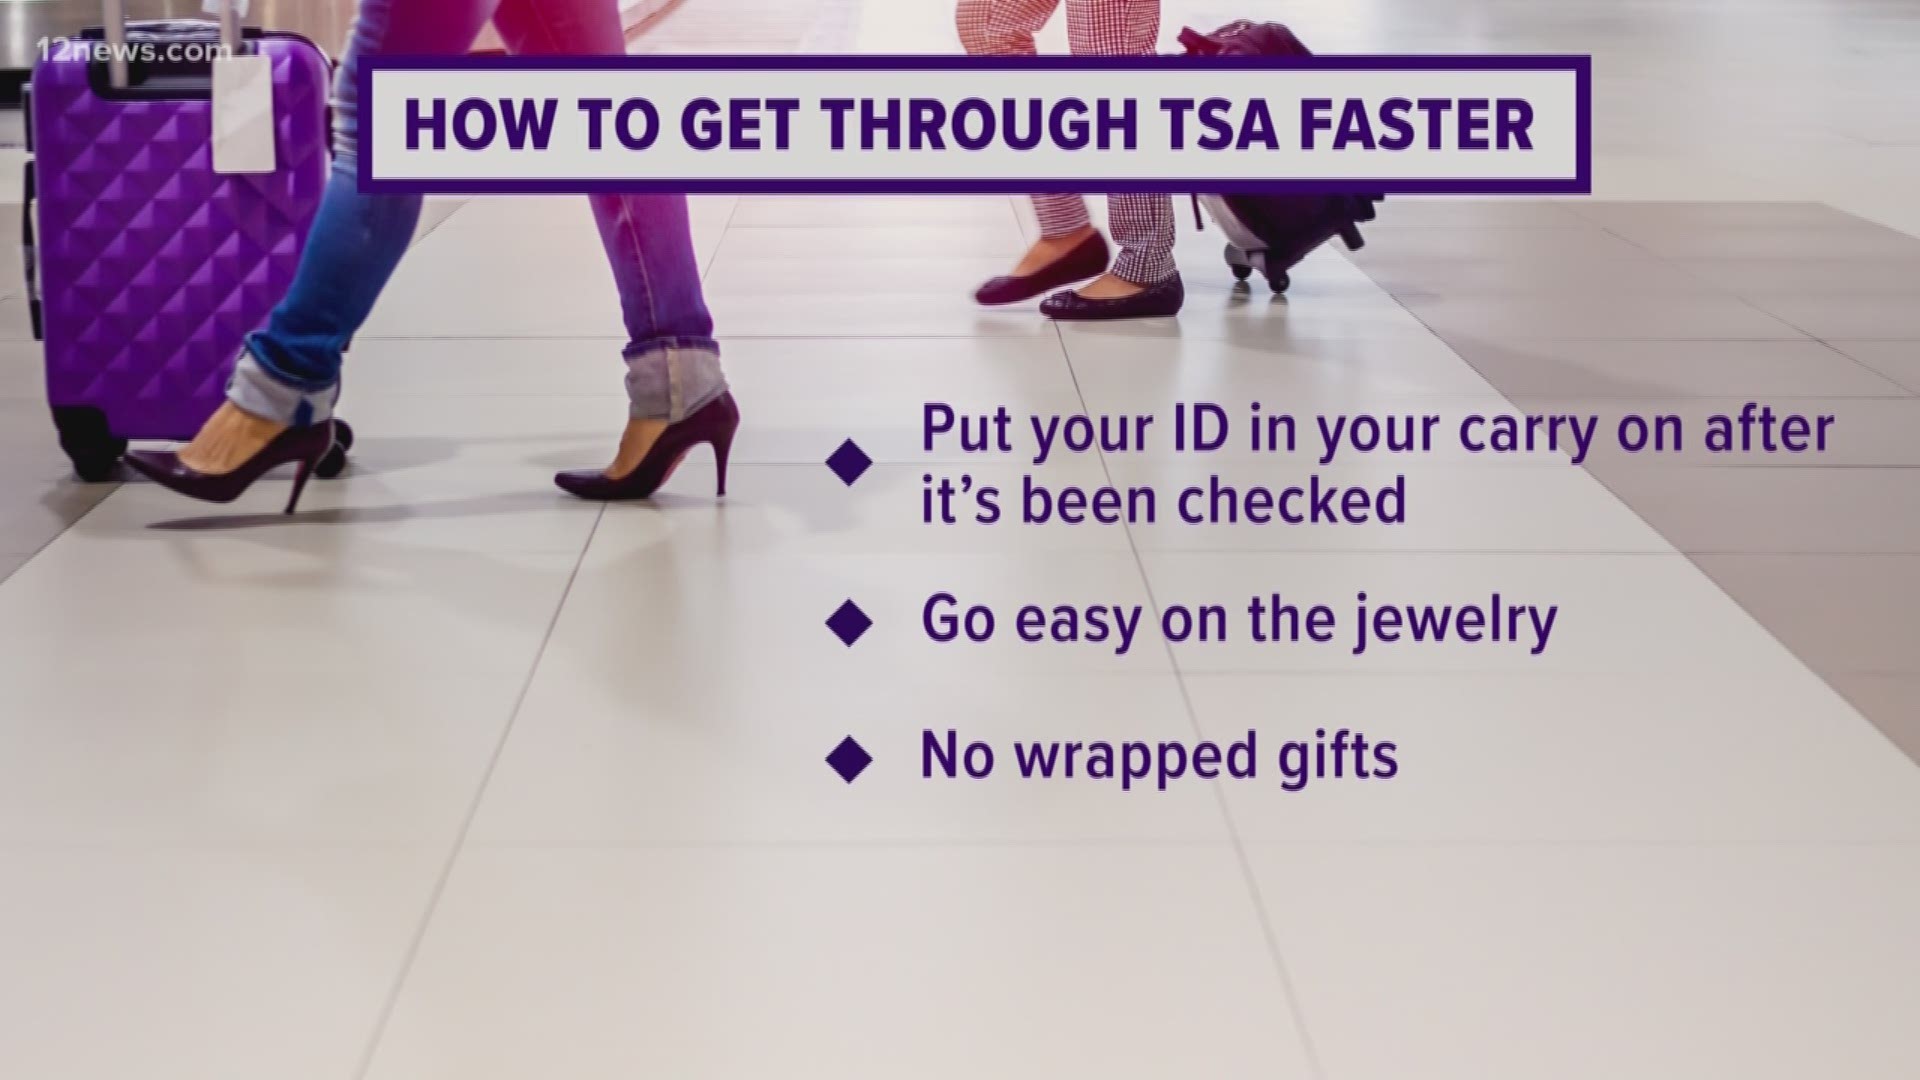 A lot of people are traveling for Memorial Day weekend. We give you tips on how to get through TSA security checkpoints more quickly to get to your destination faster.